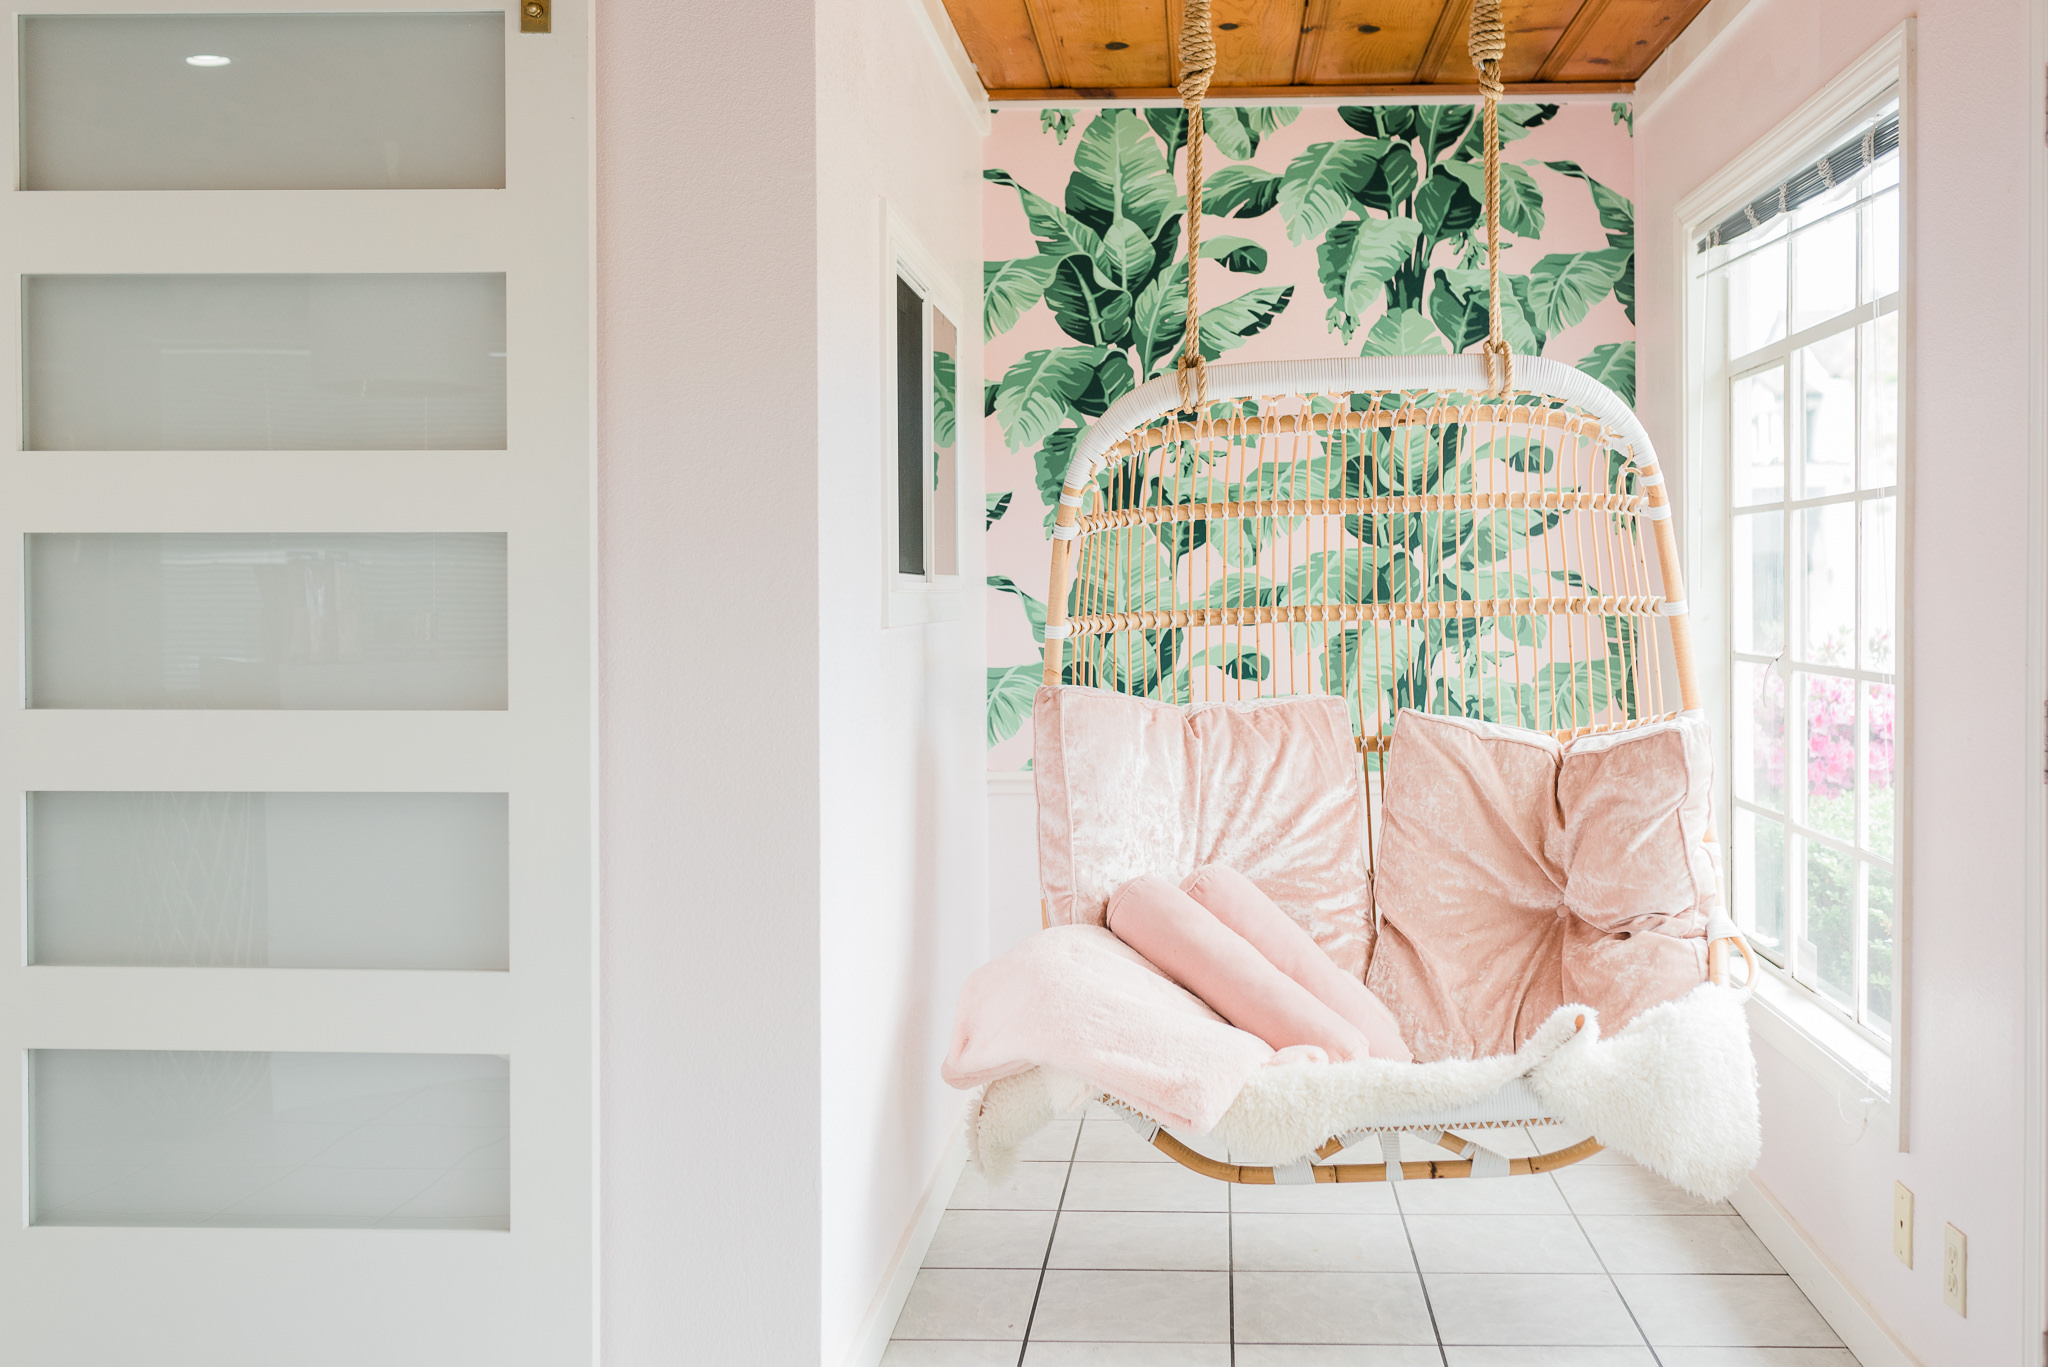 hanging chair with peach cushions. there's a leaf mural on the wall behind the chair.